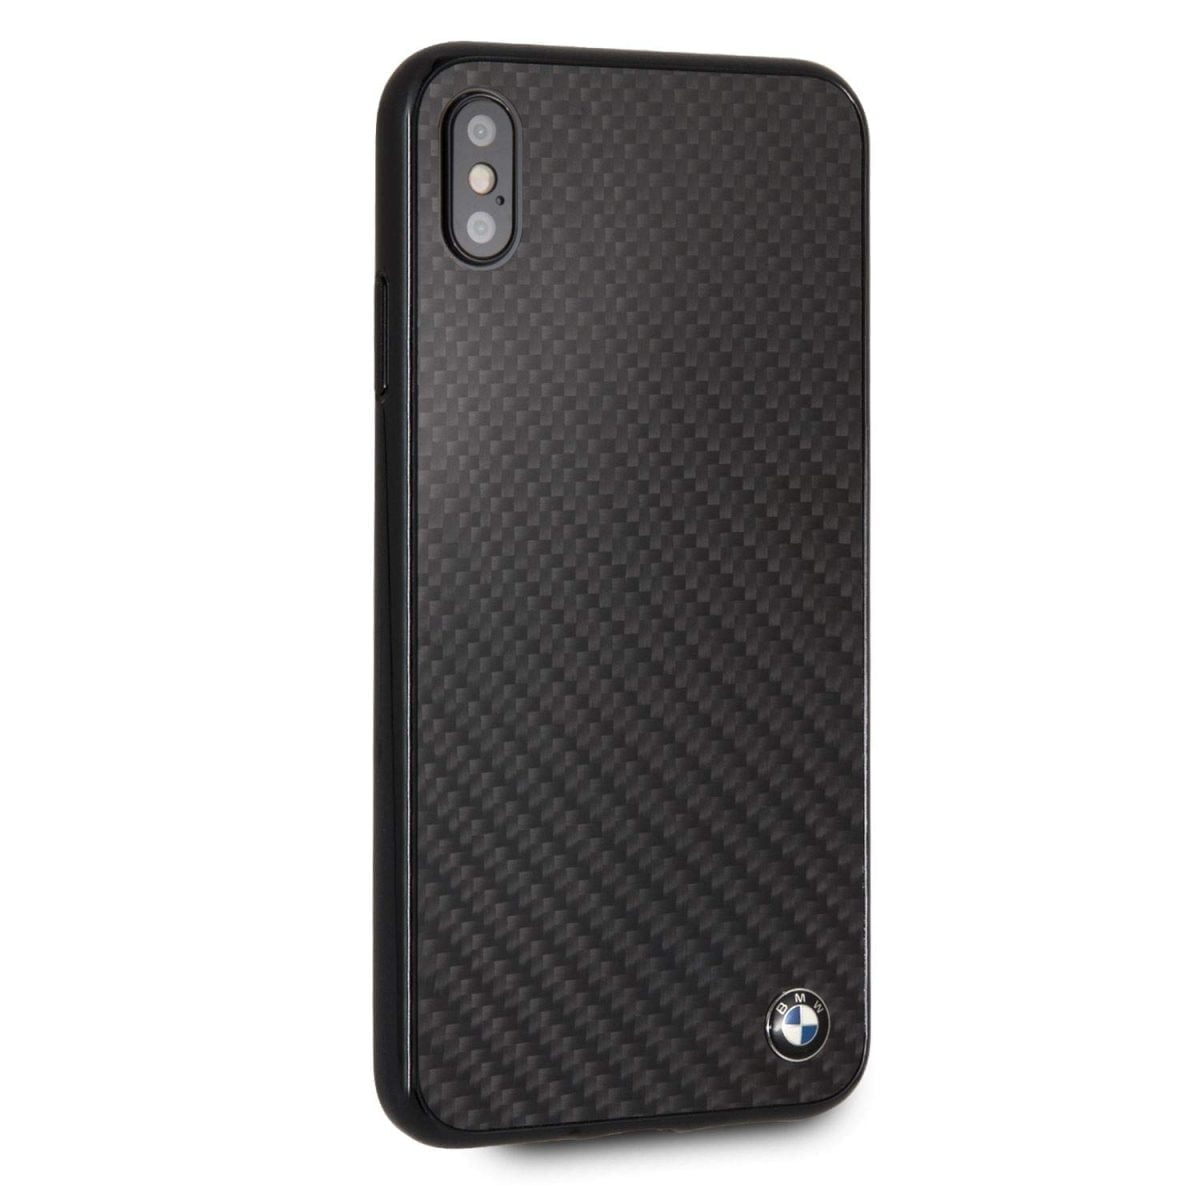 Cg Mobile Bmw Iphone Xs Max Case Black Carbon Hard Cell Phone Case Carbon Fiber Easily Accessible Ports Officially Licensed 06 Iphone Case Iphone Xs Black Carbon Fiber (Bmw)